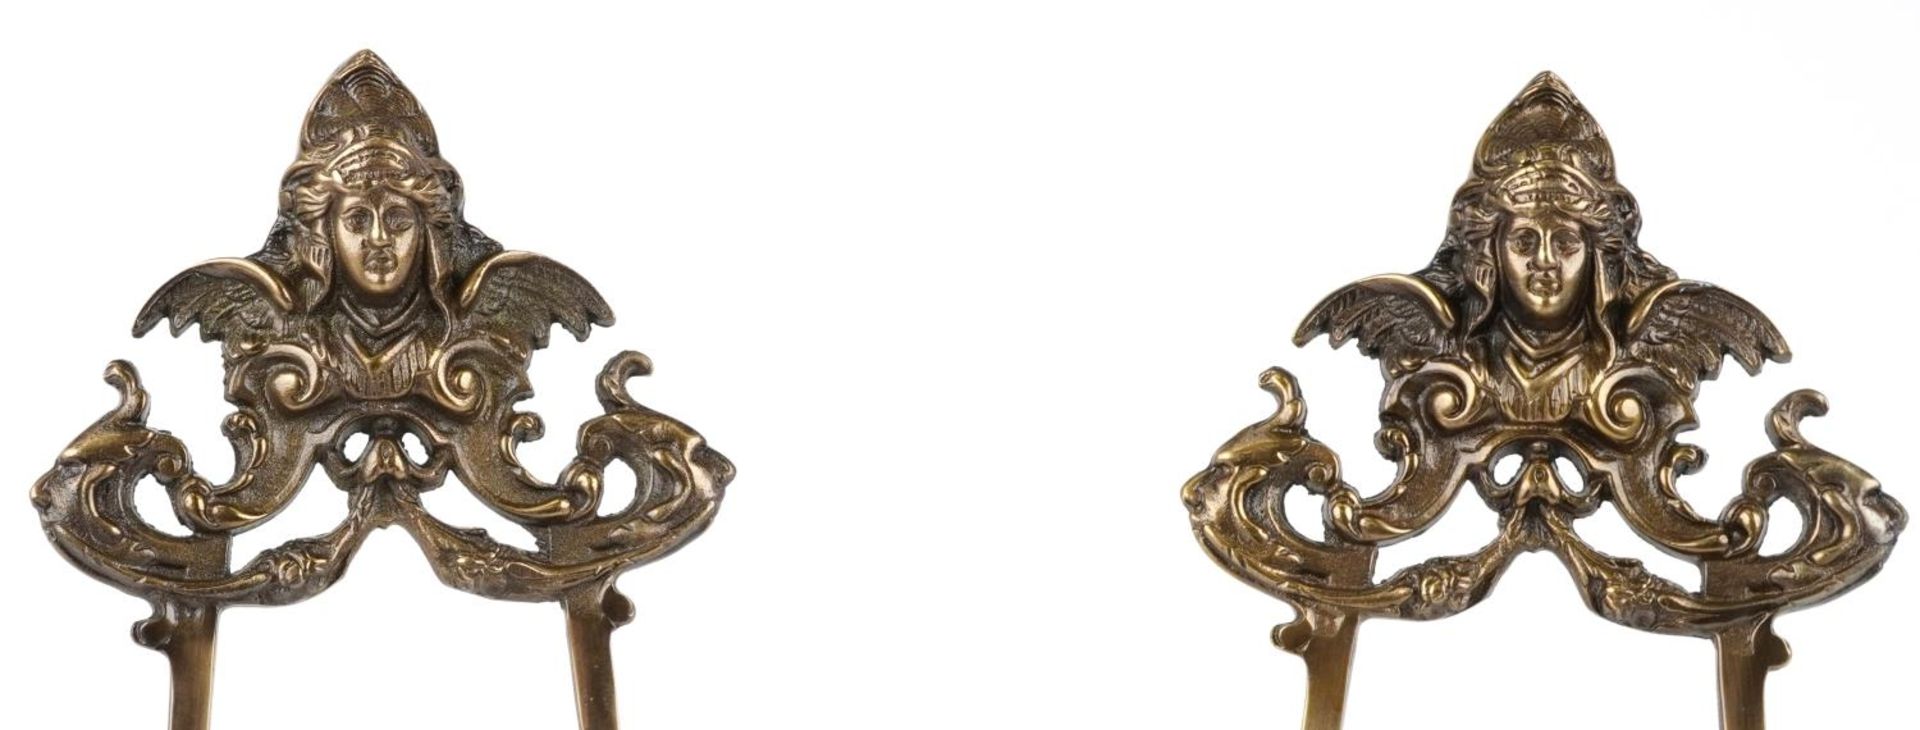 Pair of Rococo style brass easel stands, each 56cm high - Image 2 of 3